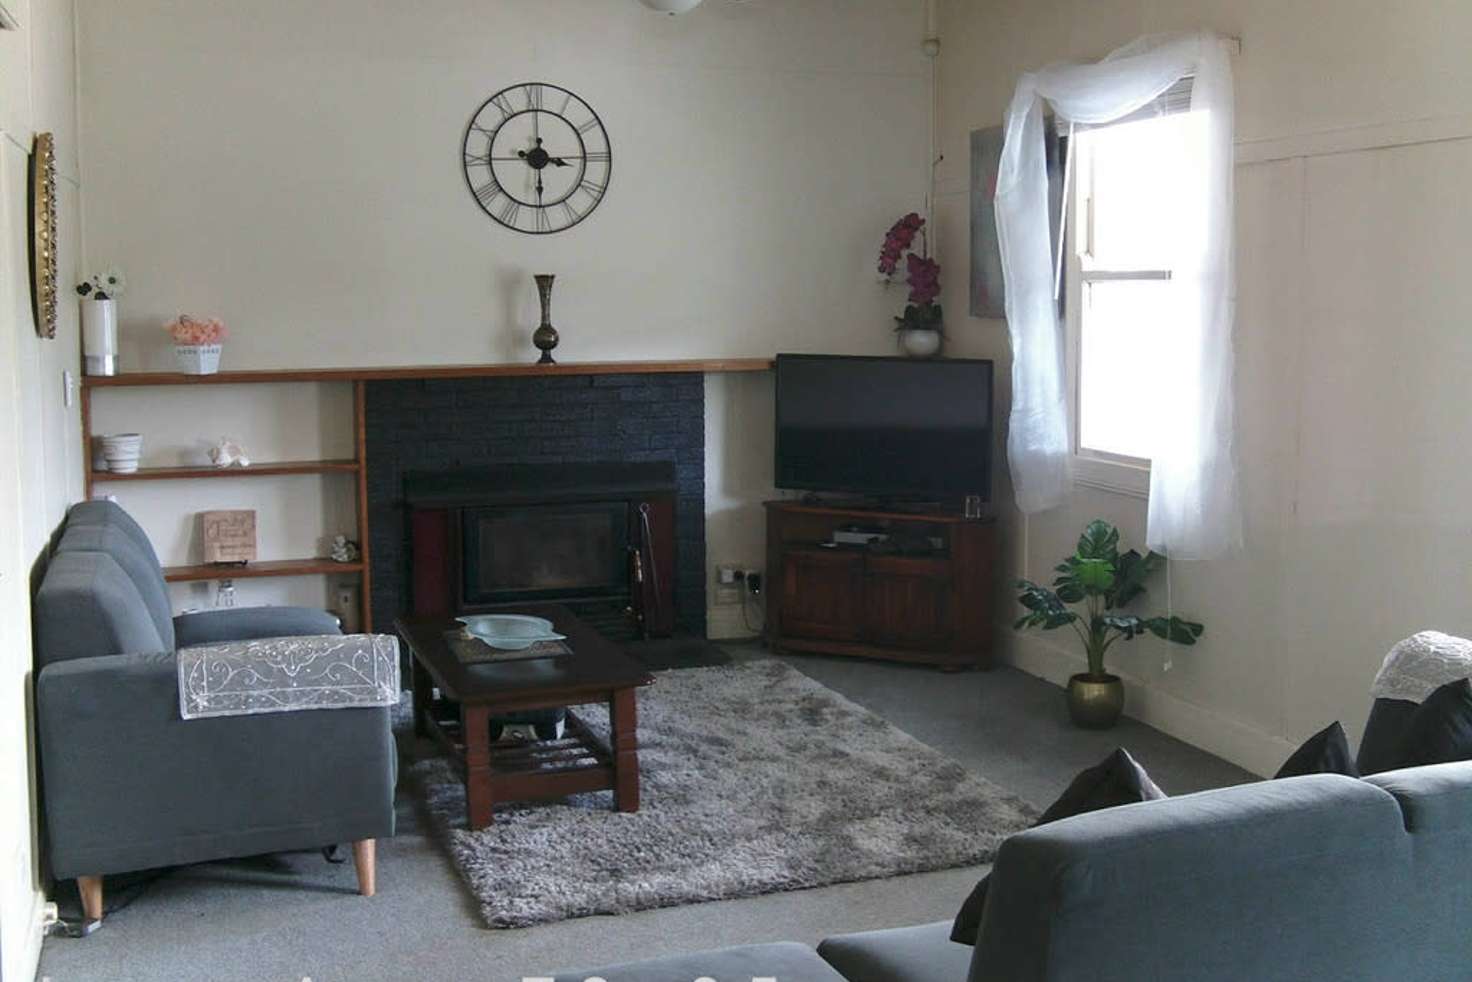 Main view of Homely house listing, 1 Parker Street, Beaufort VIC 3373